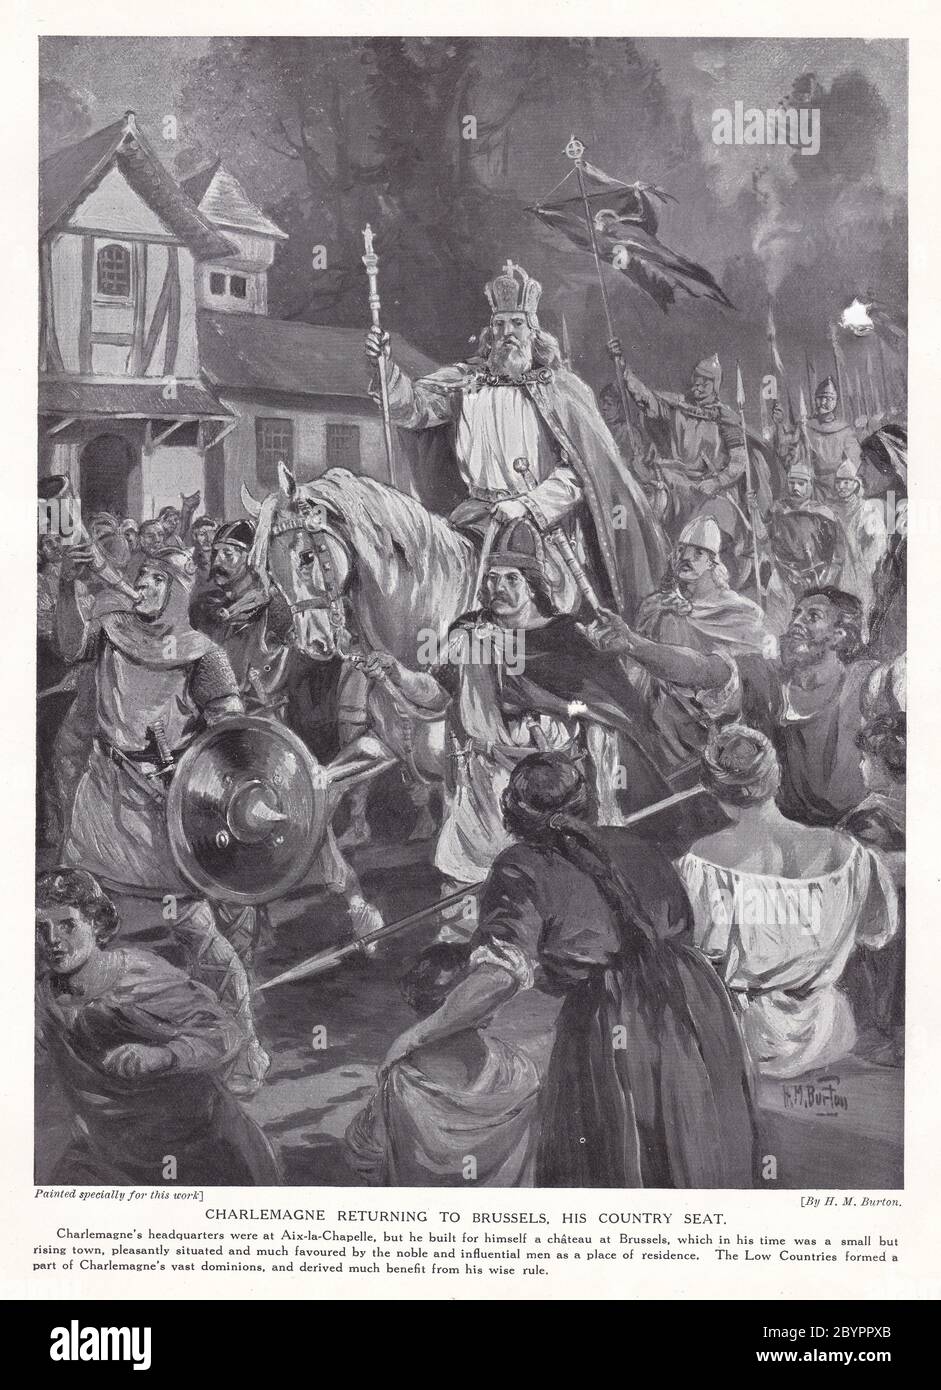 Charlemagne returning to Brussels, His Country Seat - painting by H. M.  Burton Stock Photo - Alamy